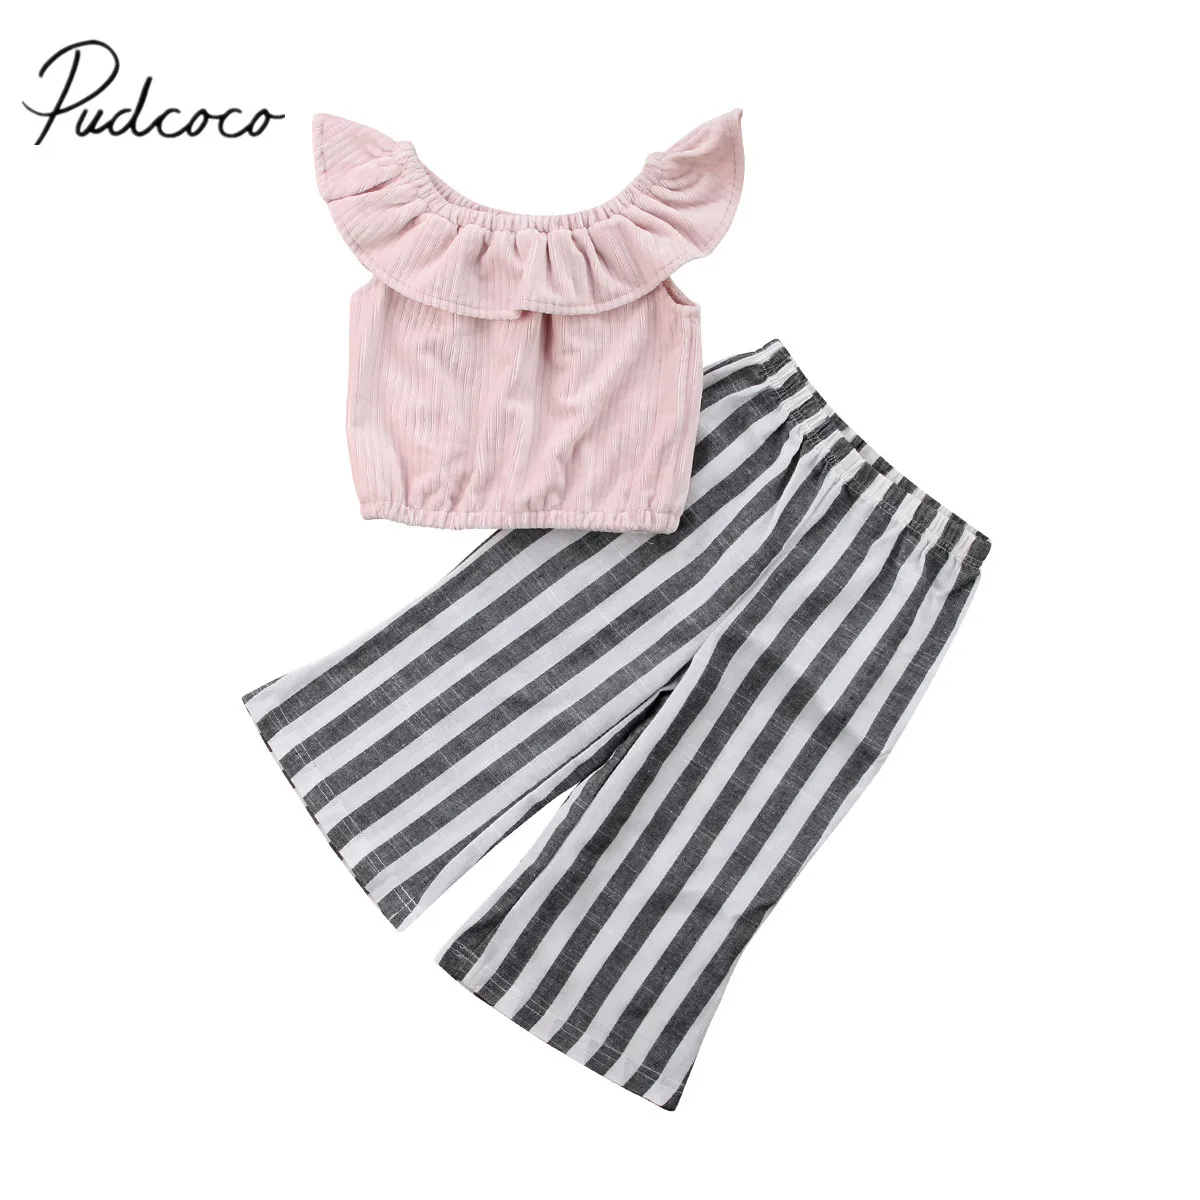 Infant Toddler Baby Girl Stripe Rainbow Skirt Outfits Sleeveless Tshirt Vest Crop Top Princess Summer Clothes Set